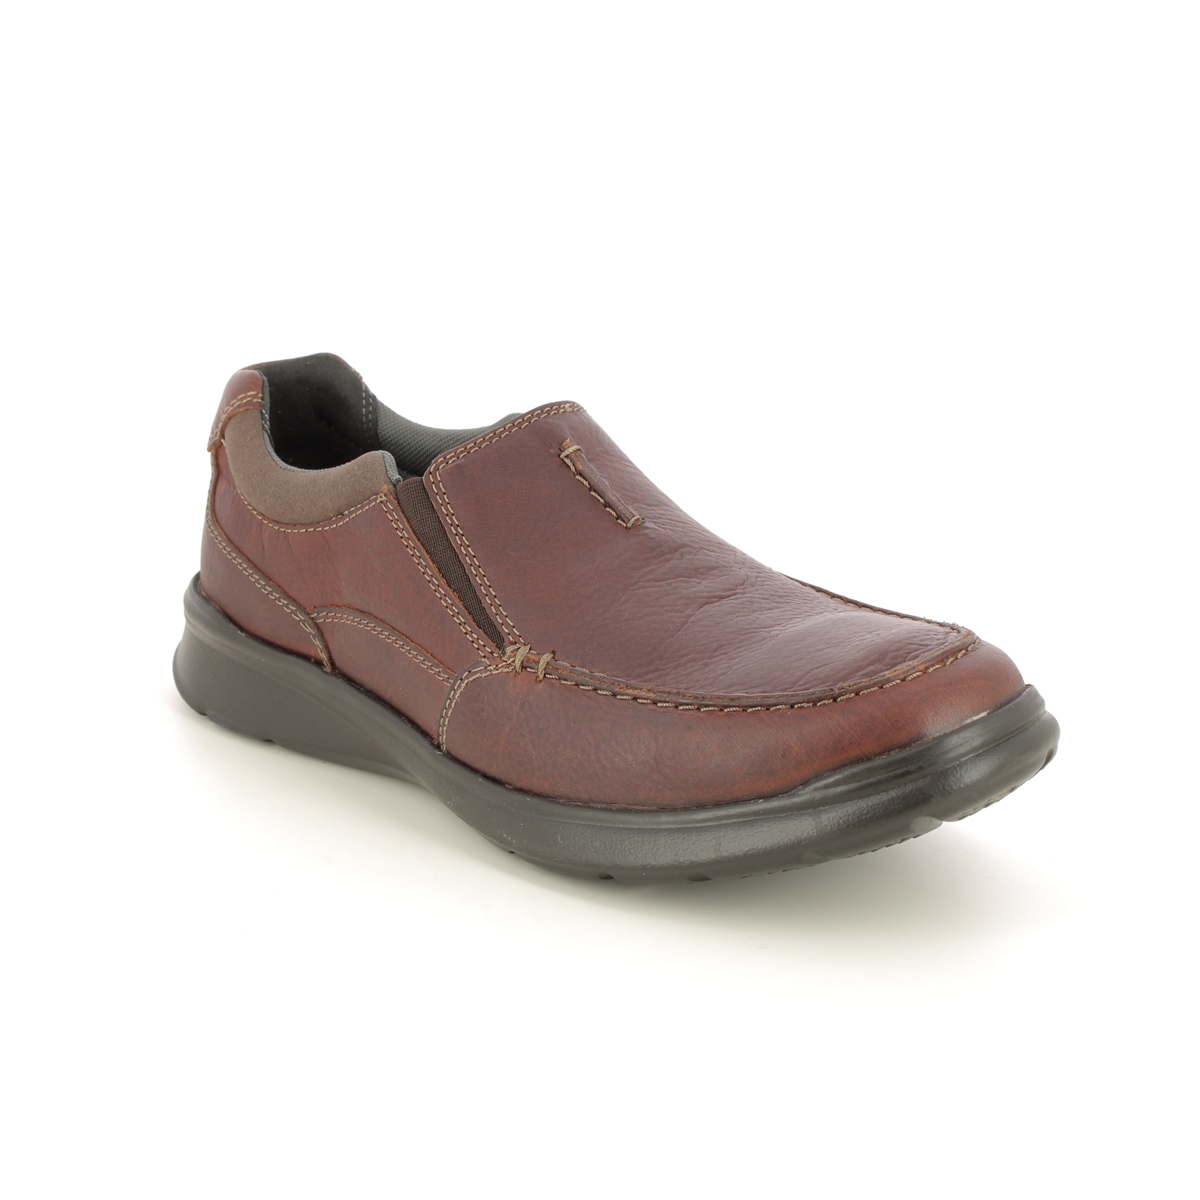 Clarks Cotrell Free Brown leather Mens comfort shoes 3156-68H in a Plain Leather in Size 6